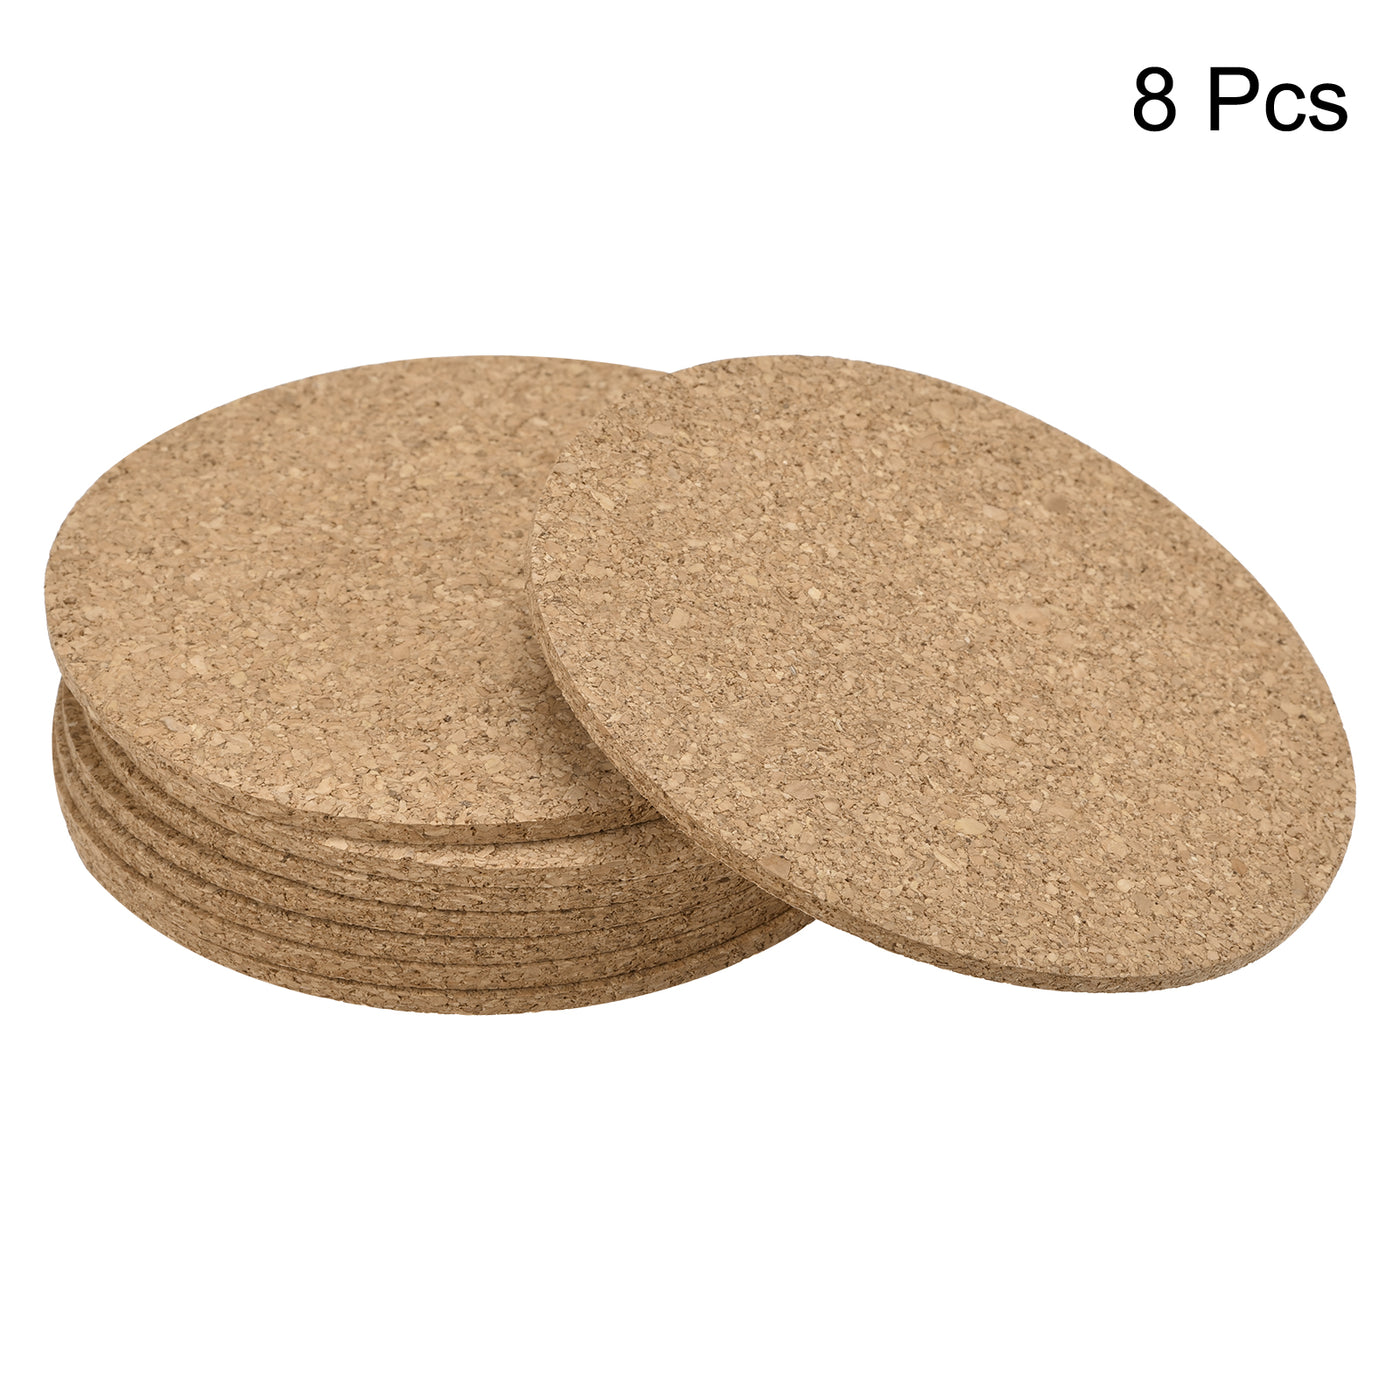 uxcell Uxcell 100mm(3.94") Round Coasters 3mm Thick Cork Cup Mat Pad for Tableware 8pcs